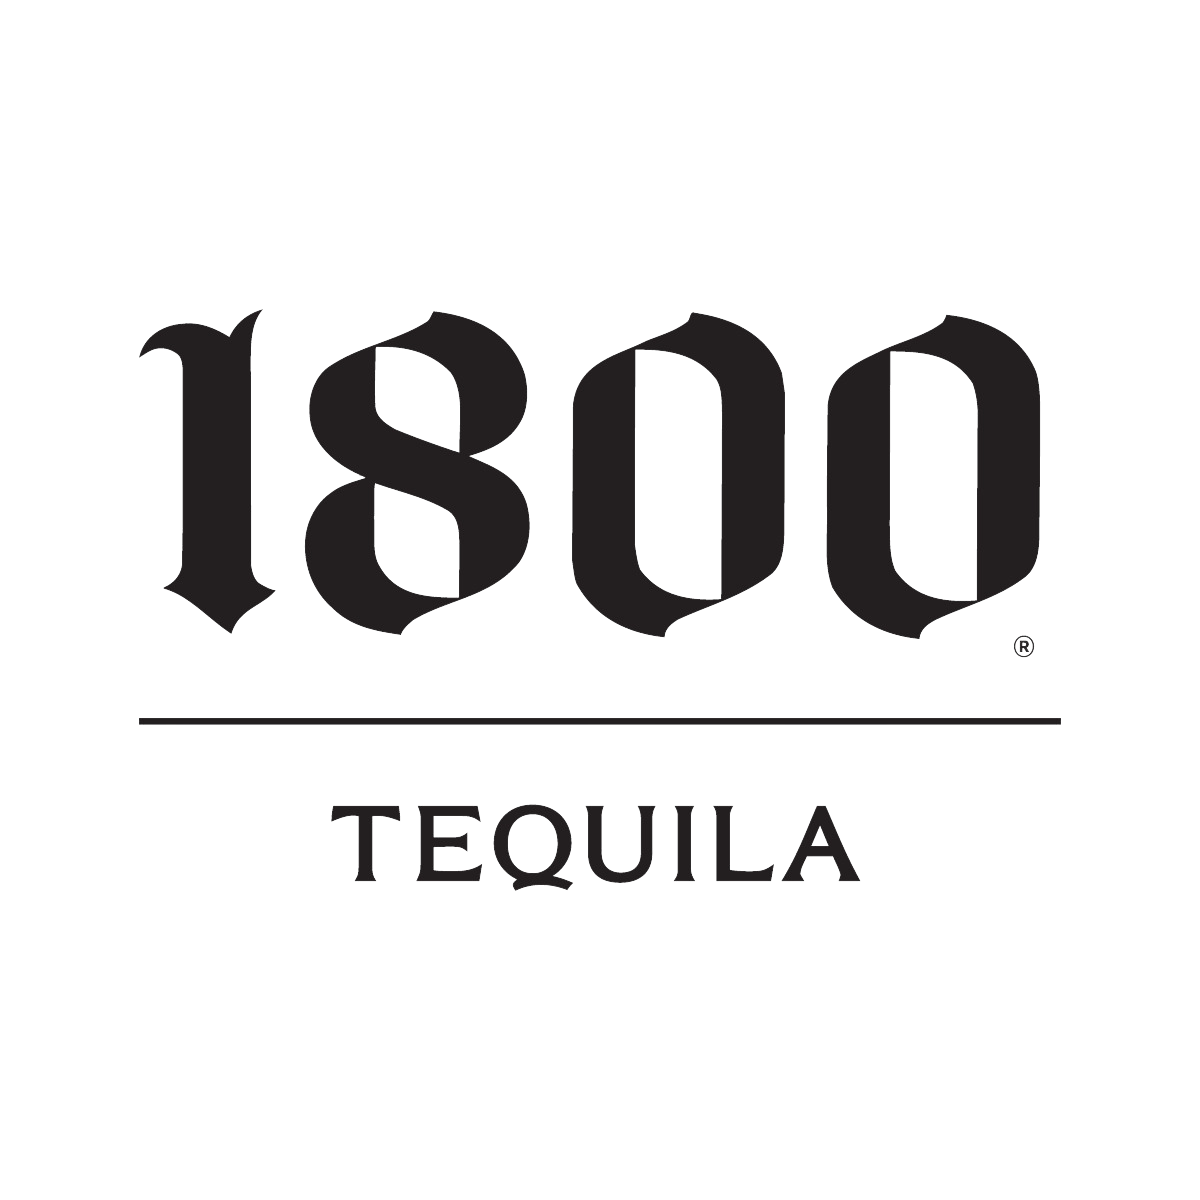 1800 Tequila.png